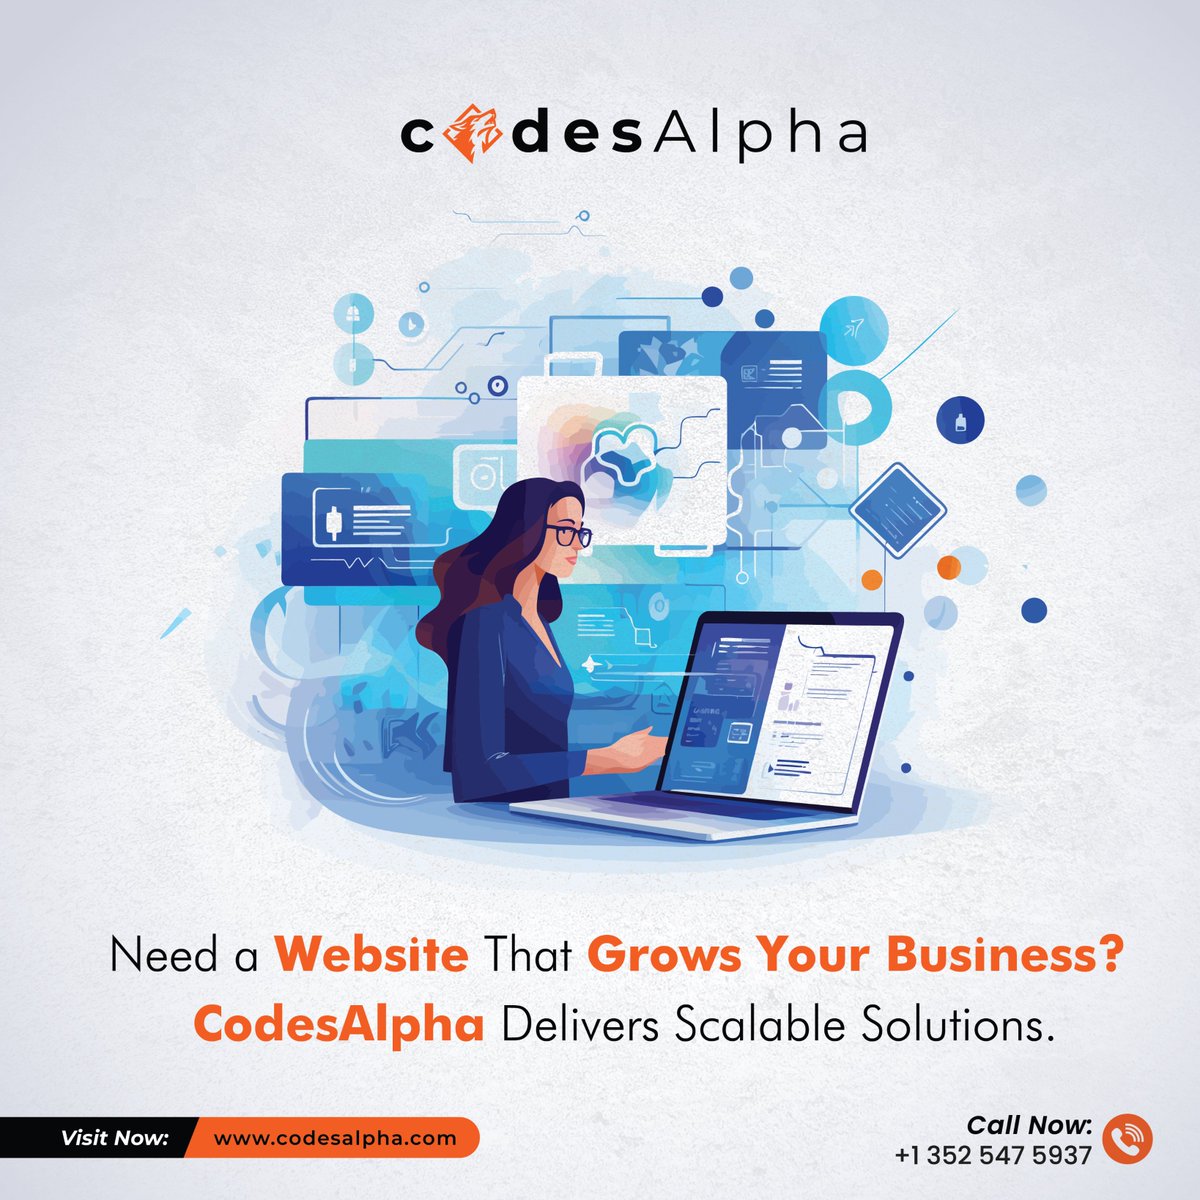 Strong Online Presence Is Key To Business Growth. Codesalpha Delivers Scalable Website Solutions To Empower Your Brand.

Call us at +123-456-7890
or
visit codesalpha.com to get started!

#codesalpha #webdesign #uxdesign #uiux #responsivedesign #websitedesign #branding